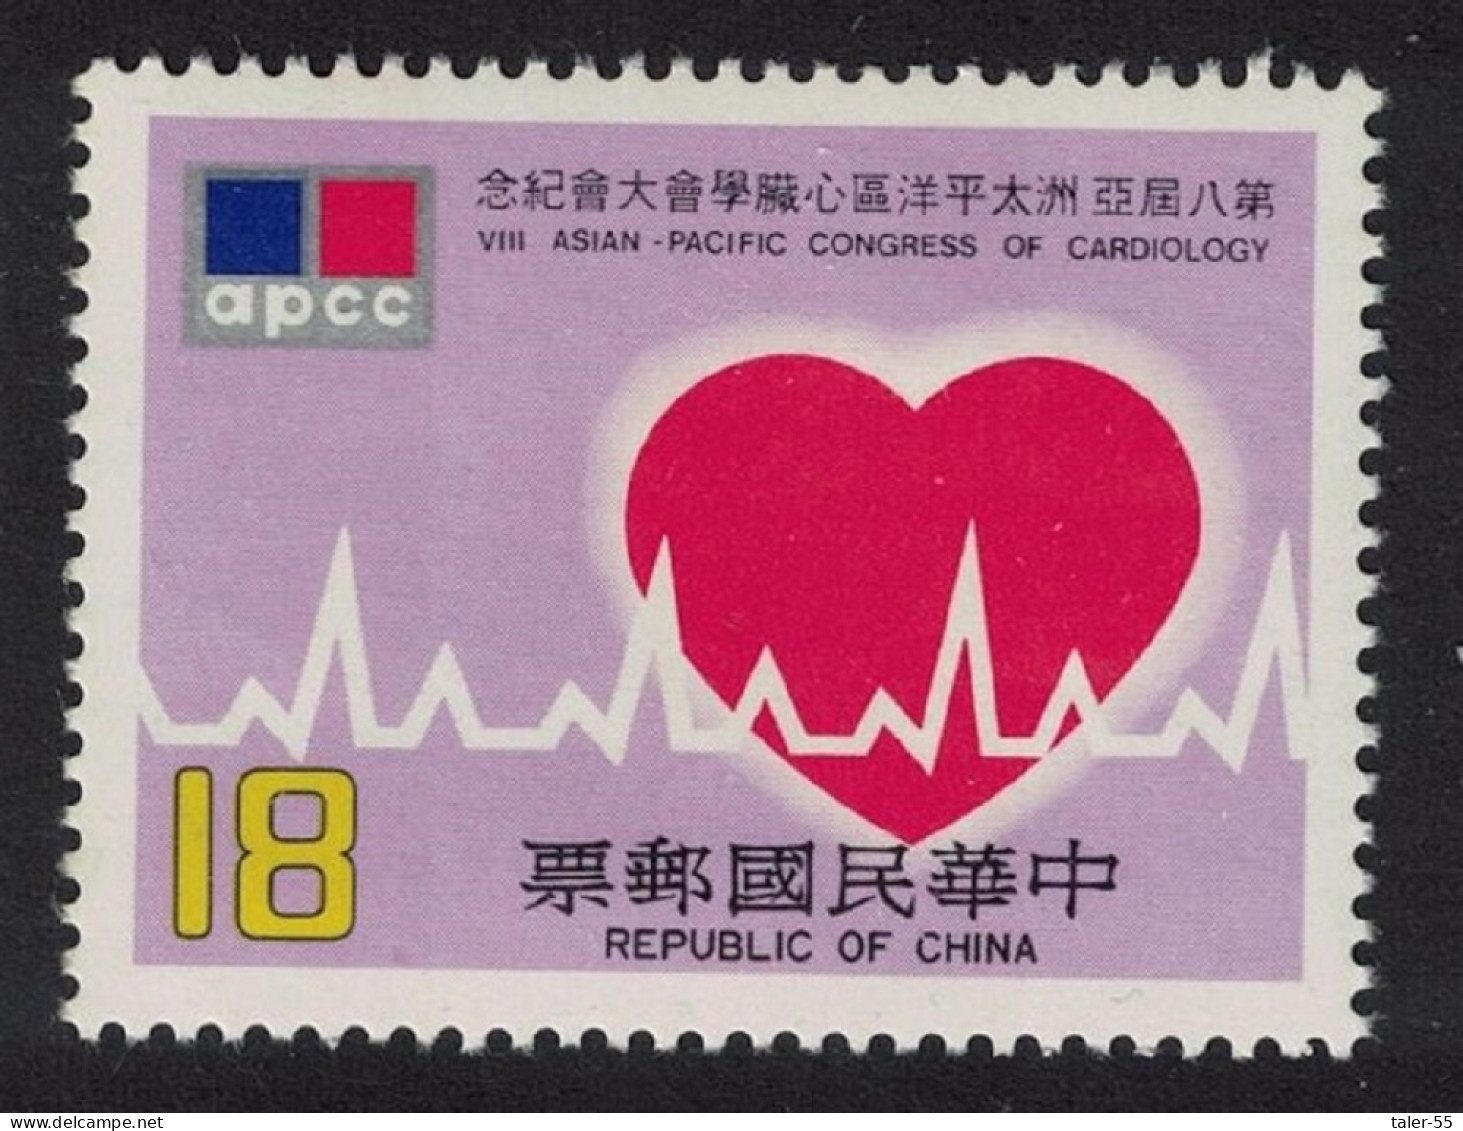 Taiwan Eight Asian-Pacific Cardiology Congress $18 1983 MNH SG#1513 - Unused Stamps